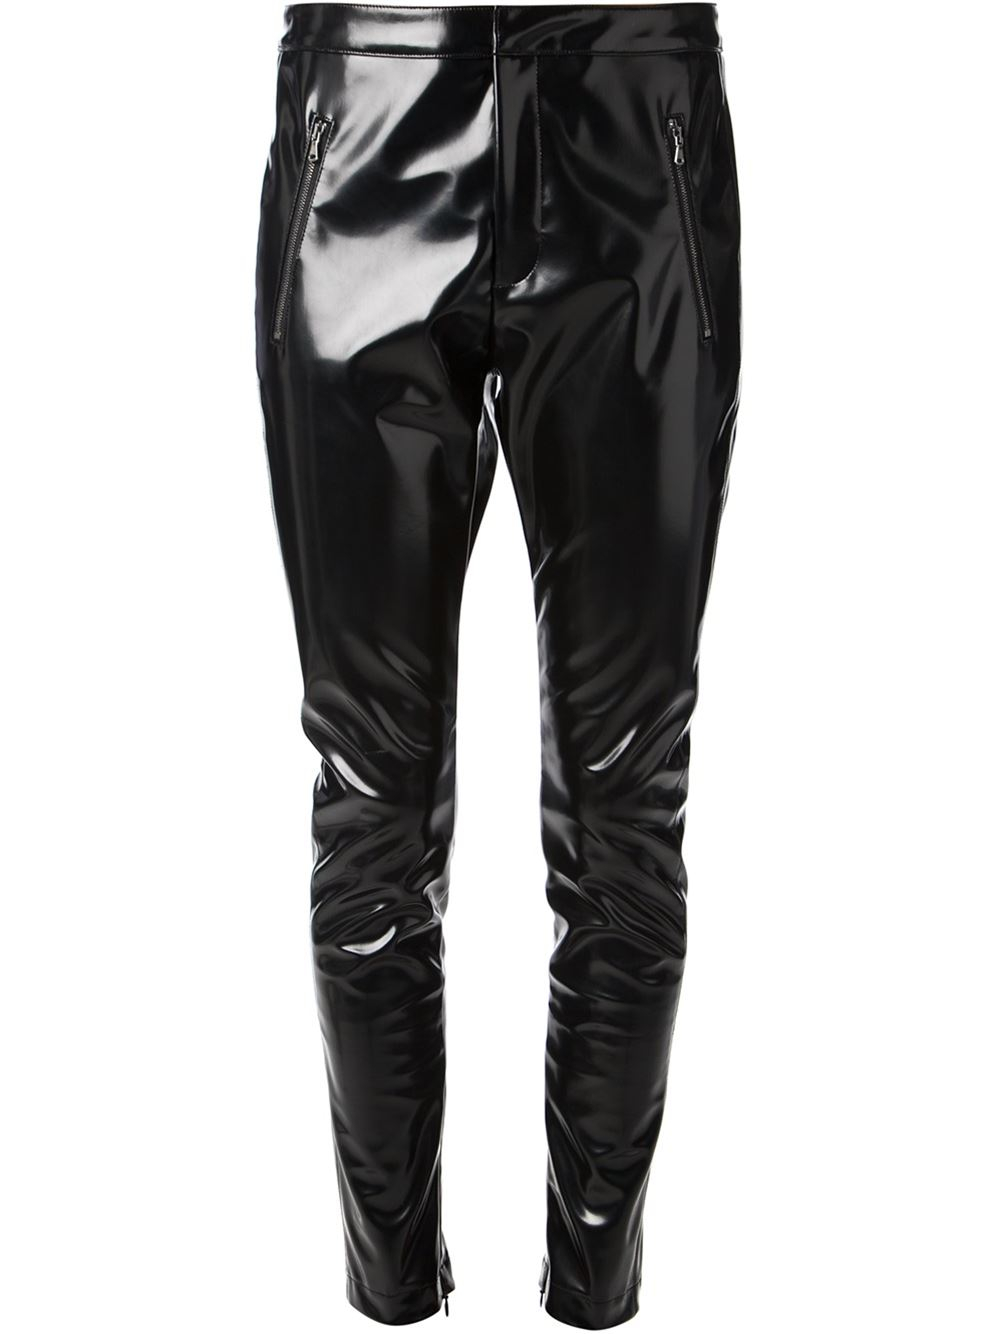 Lyst - Msgm Varnished Skinny Trousers in Black